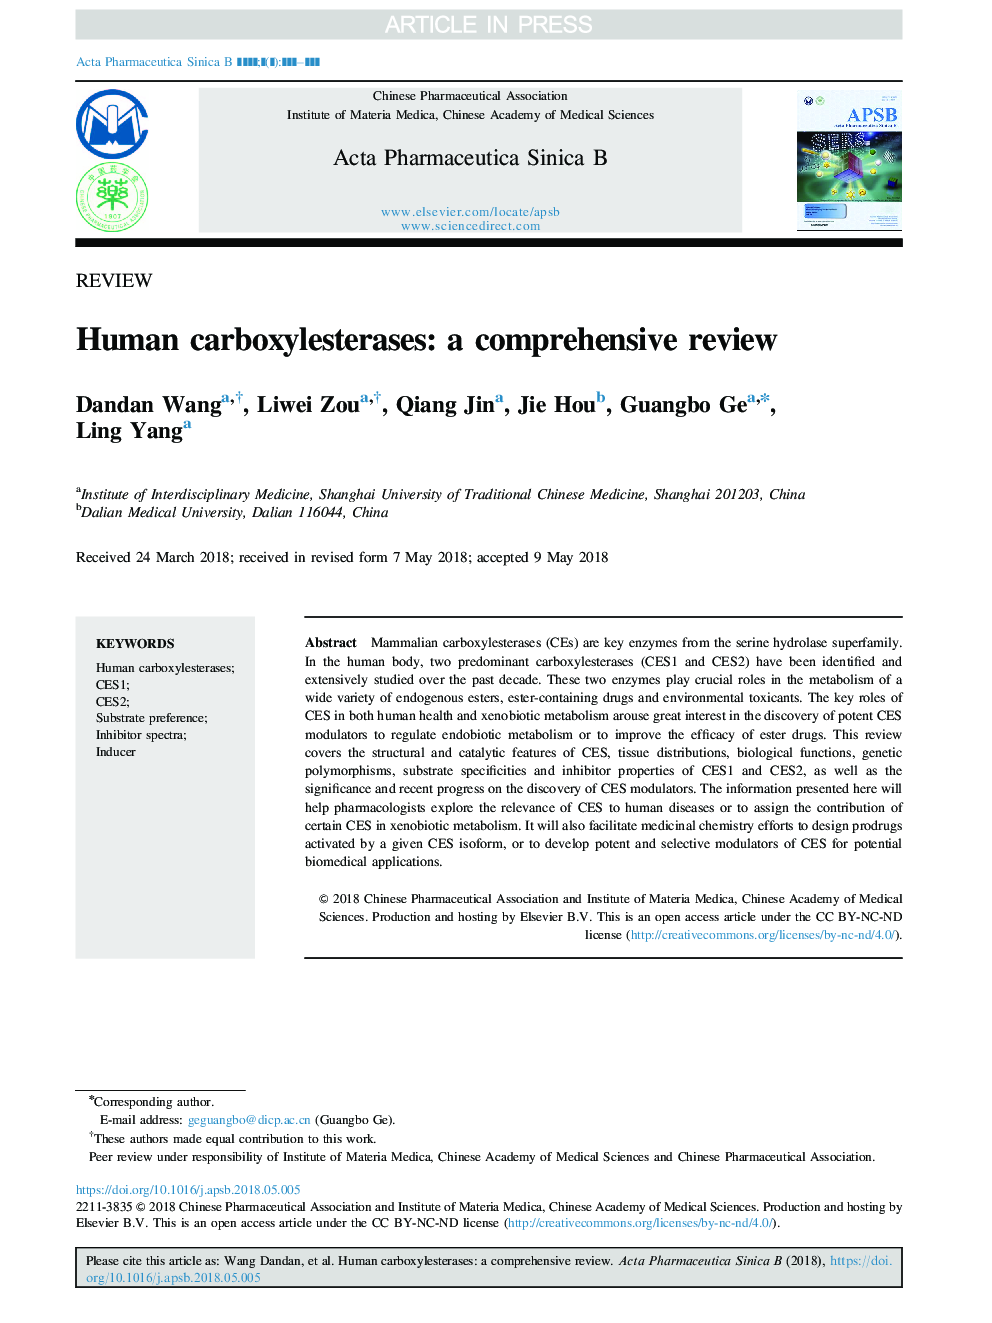 Human carboxylesterases: a comprehensive review